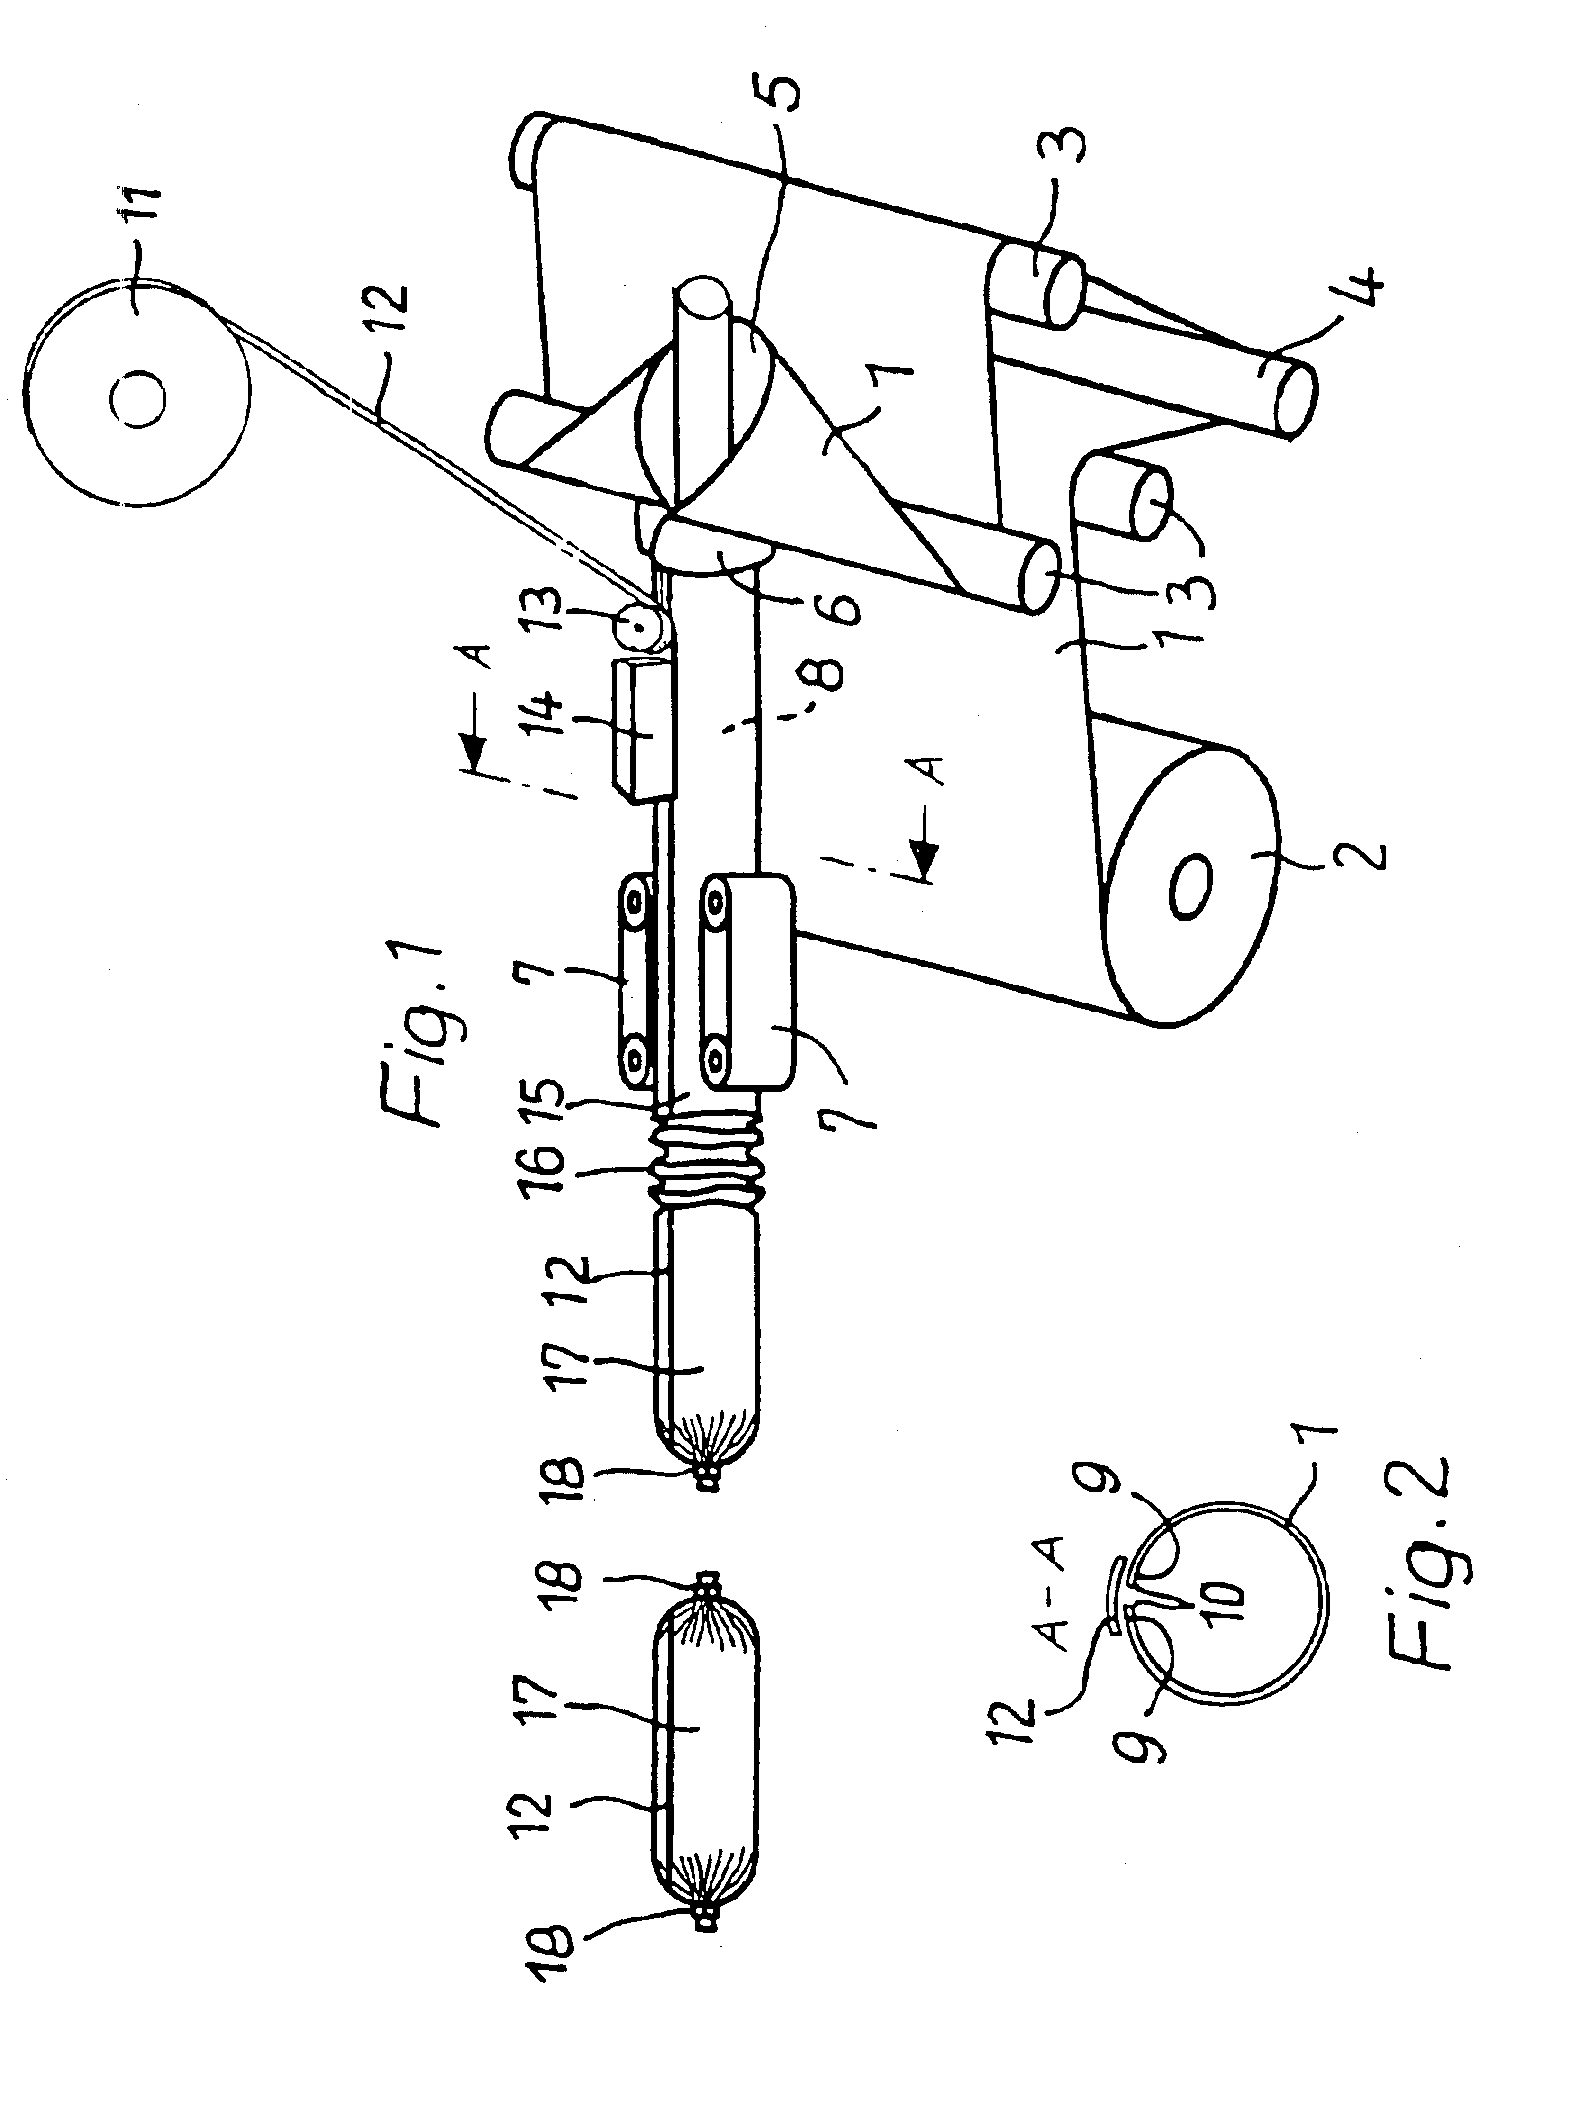 Method for producing a casing